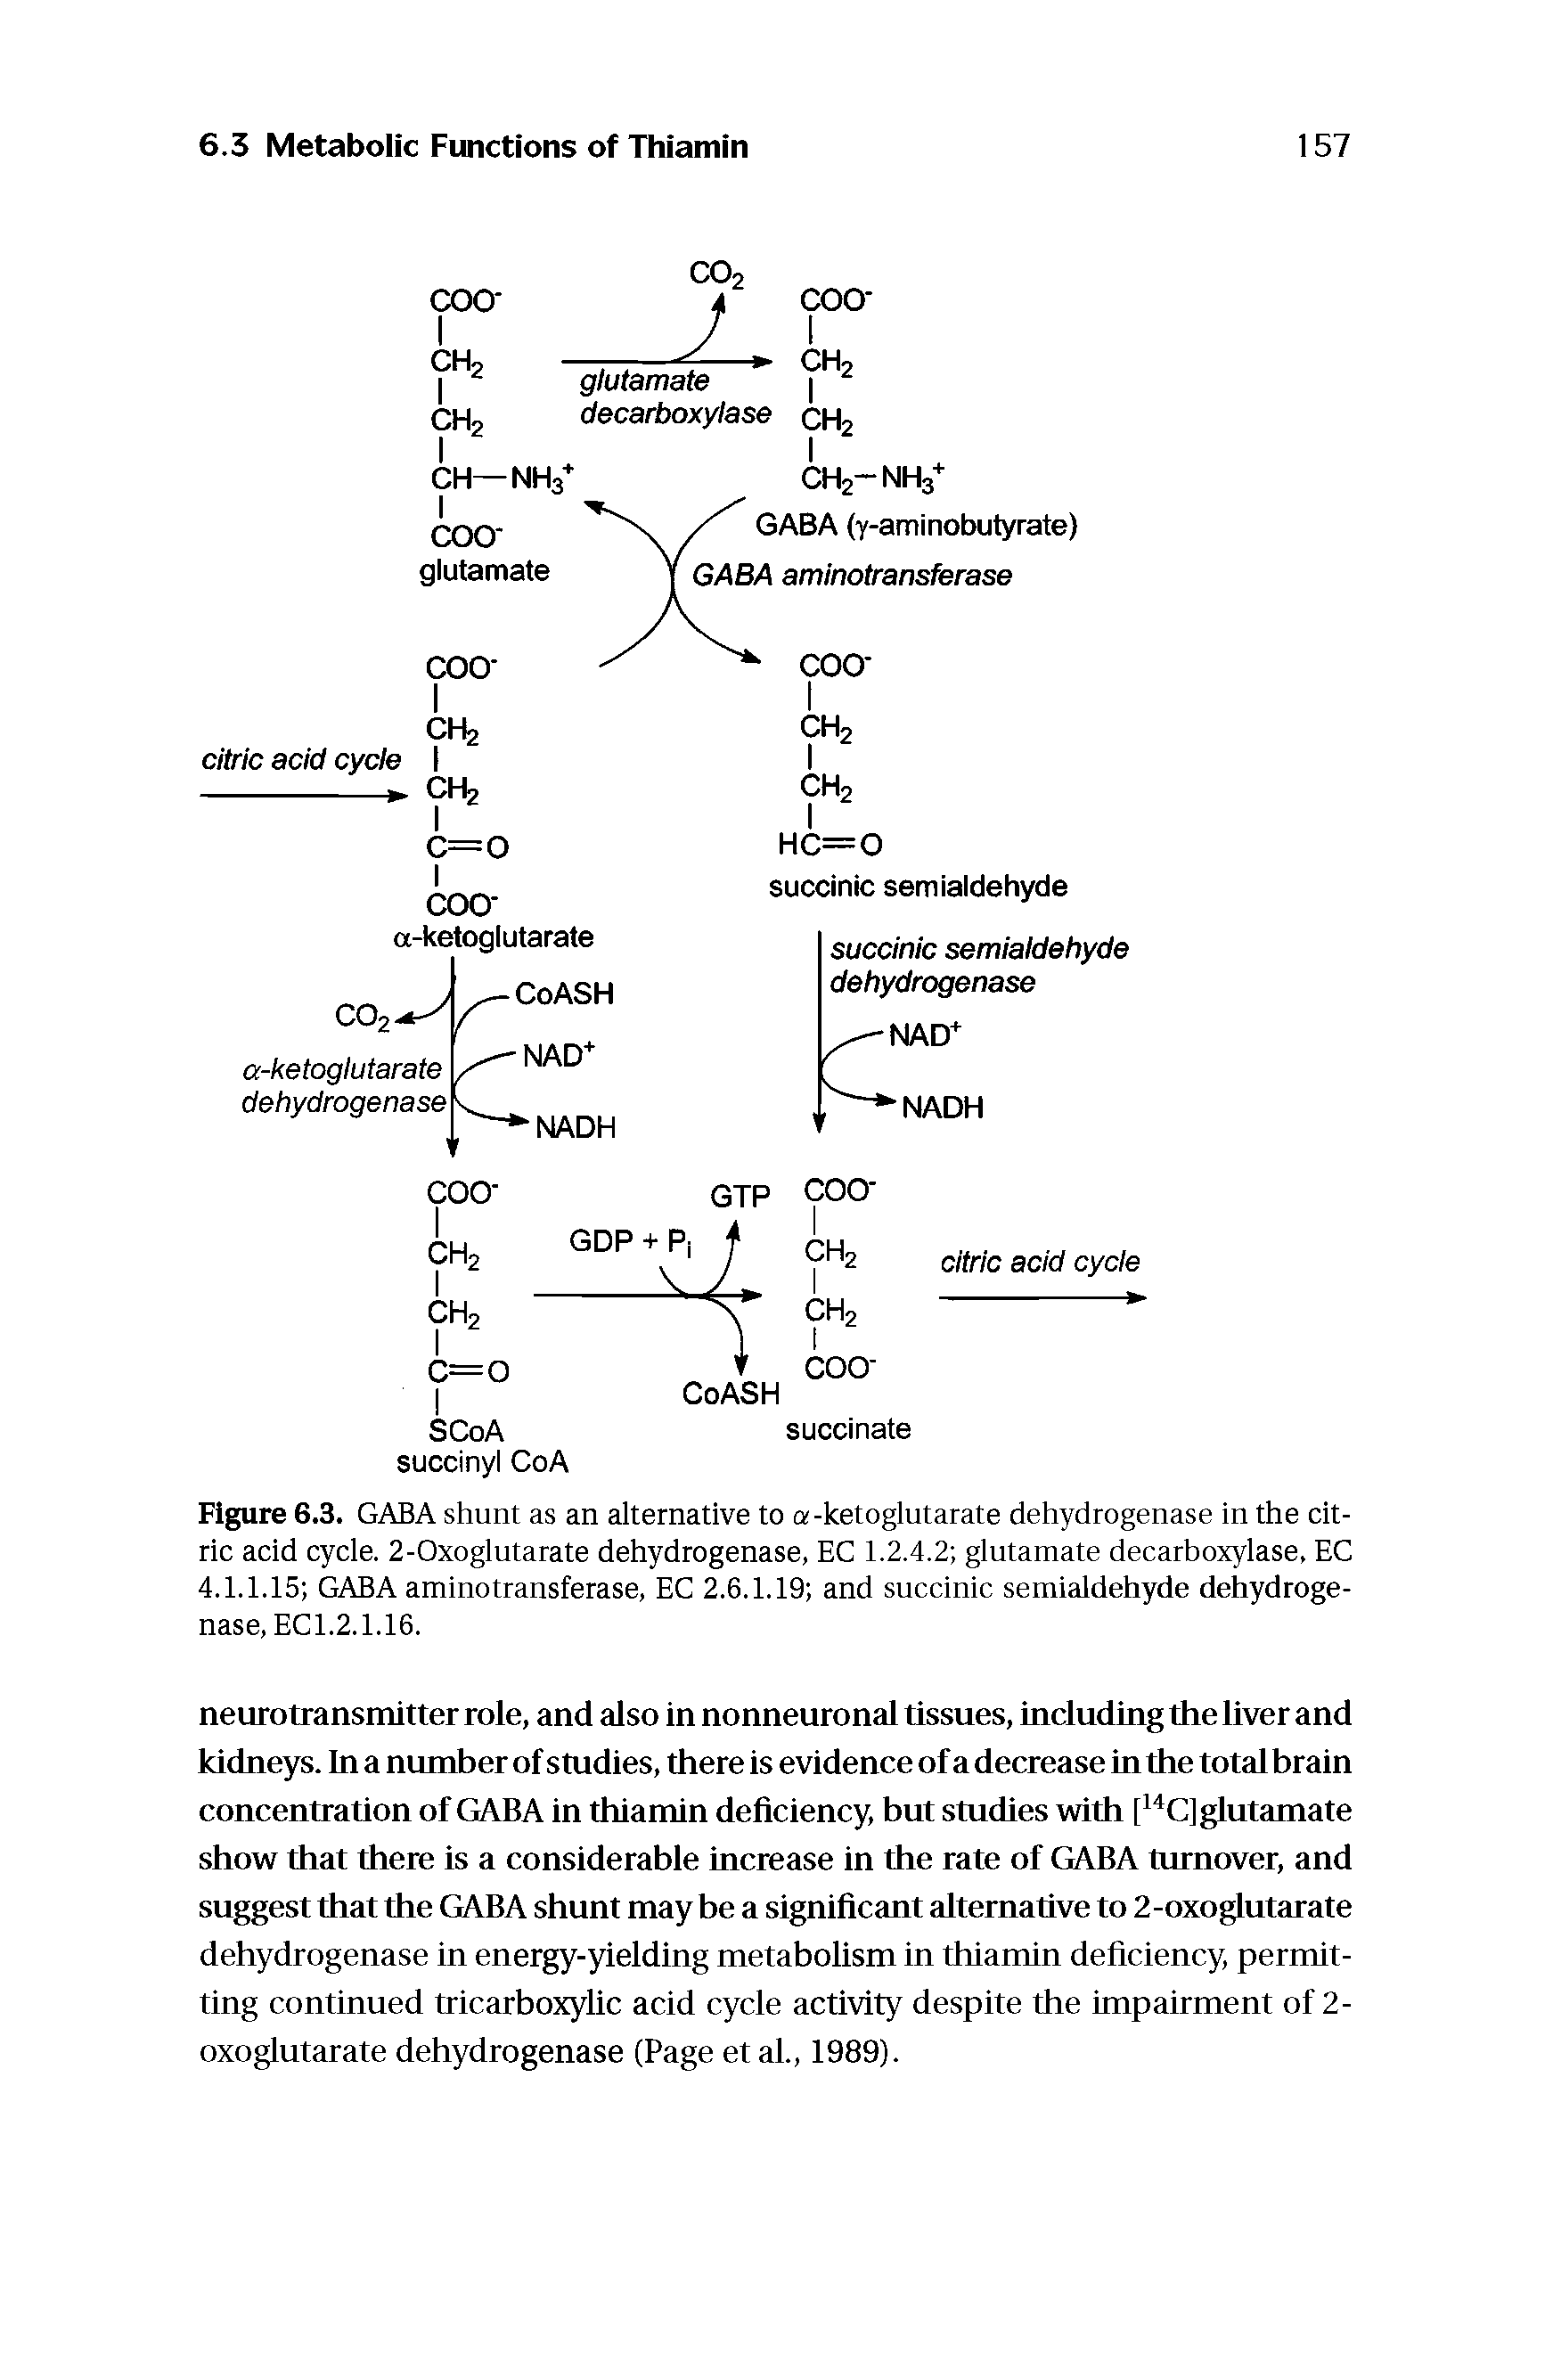 Figure 6.3. GABA shunt as an alternative to a-ketoglutarate dehydrogenase in the citric acid cycle. 2-Oxoglutarate dehydrogenase, EC 1.2.4.2 glutamate decarboxylase, EC 4.1.1.15 GABA aminotransferase, EC 2.6.1.19 and succinic semialdehyde dehydrogenase, ECl.2.1.16.